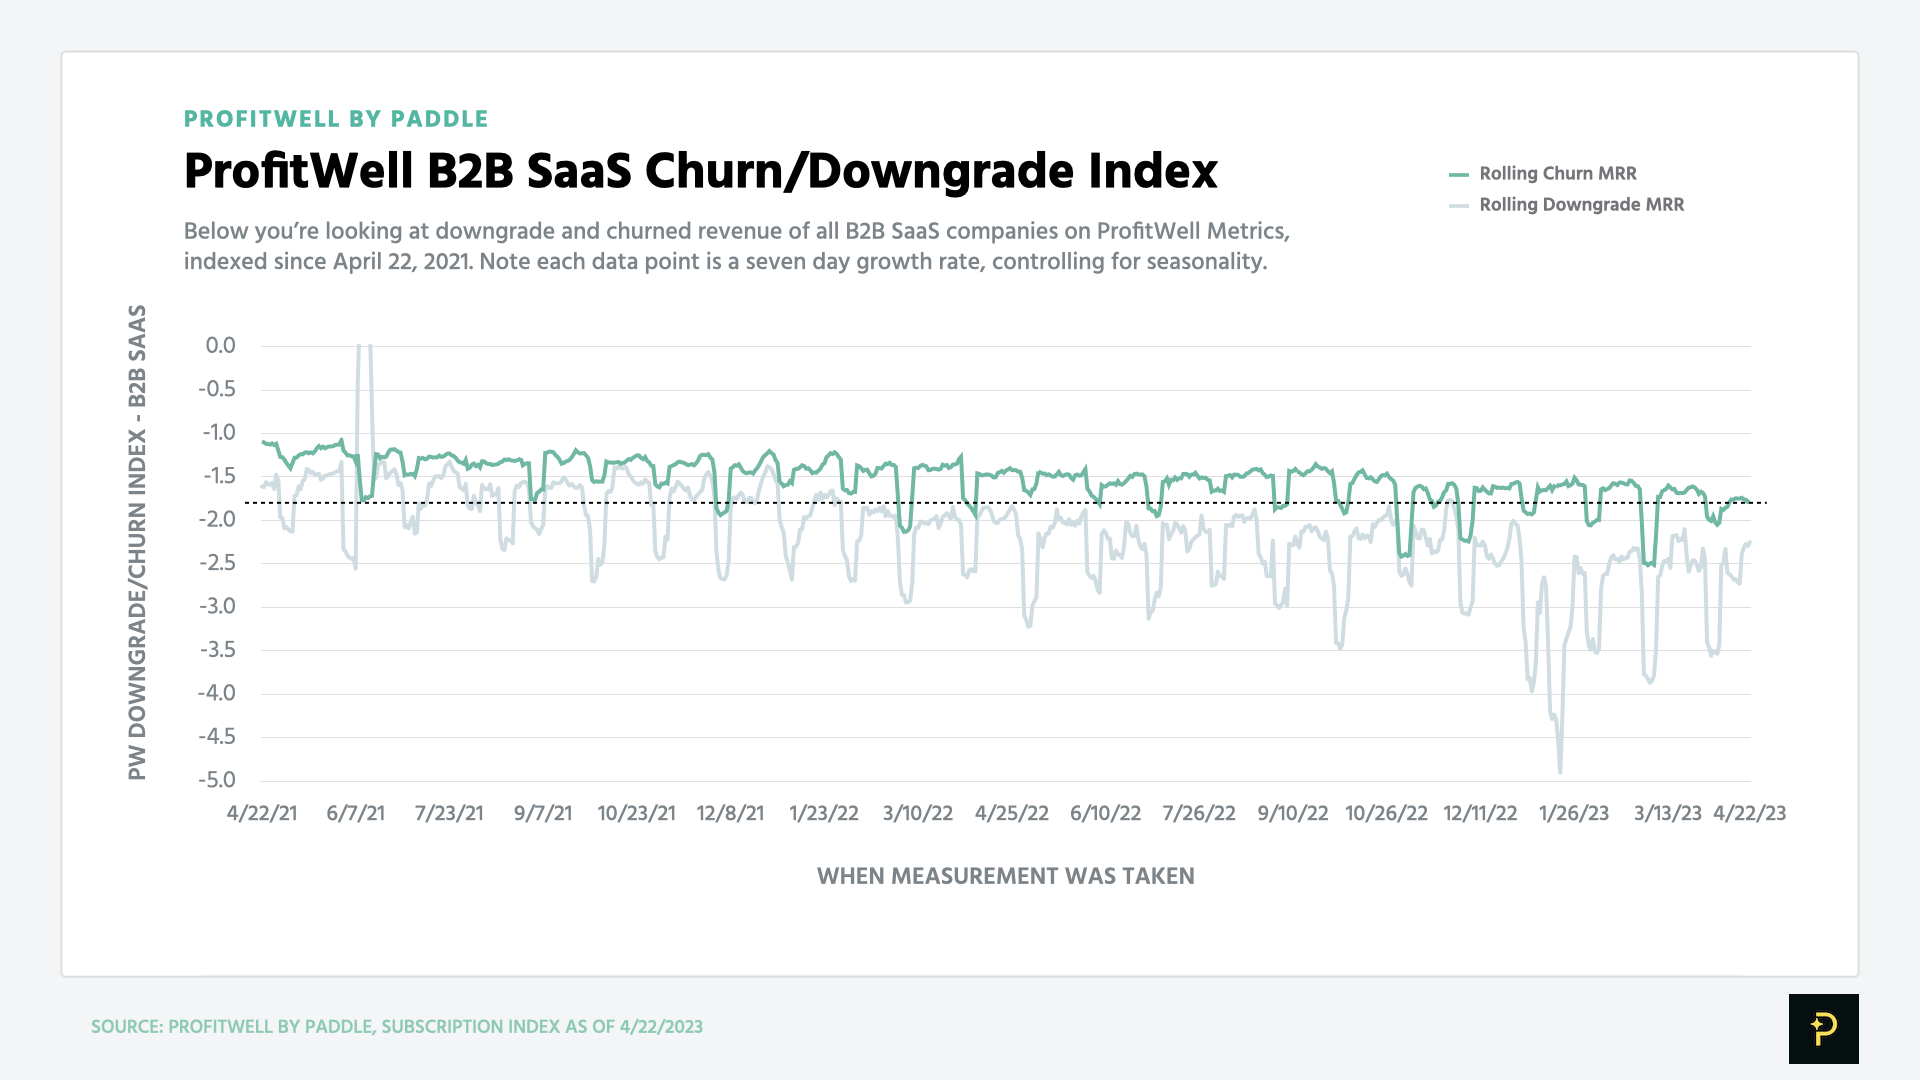 Chart of the ProfitWell B2B SaaS Churn/Downgrade Index, showing April 2023 churn at elevated levels but not much different from the previous month.